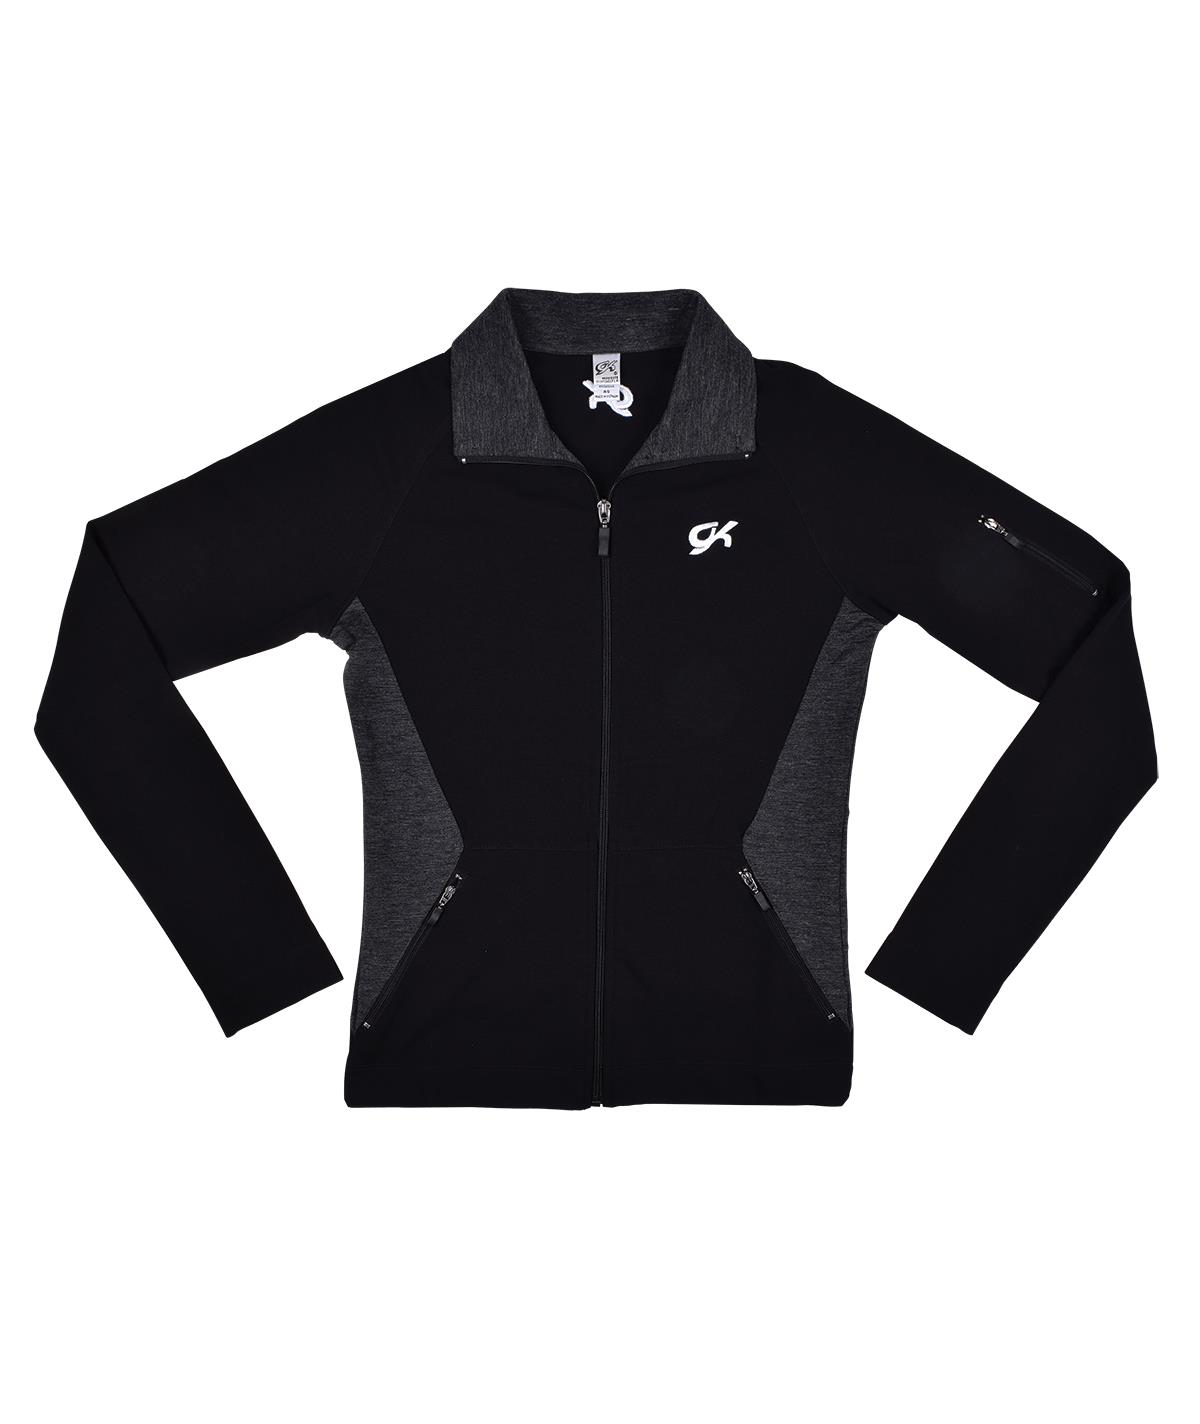 GK Balance Fitted Warmup Jacket